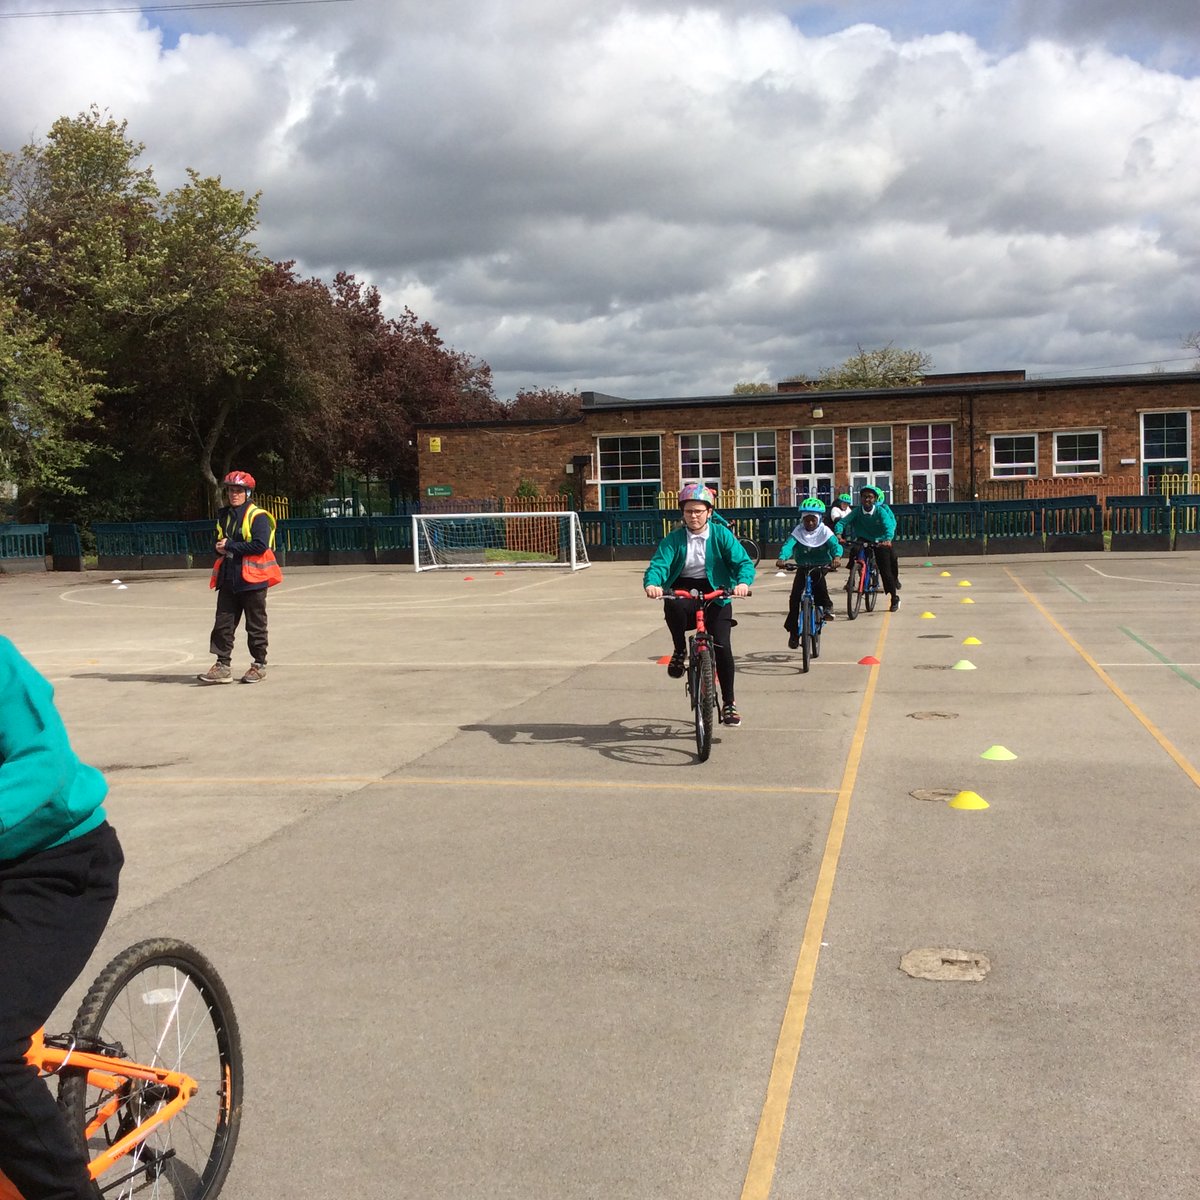 Our year 5 children have had a fantastic week with bikeability demonstrating their cycling skills and road awareness. #LwLAT